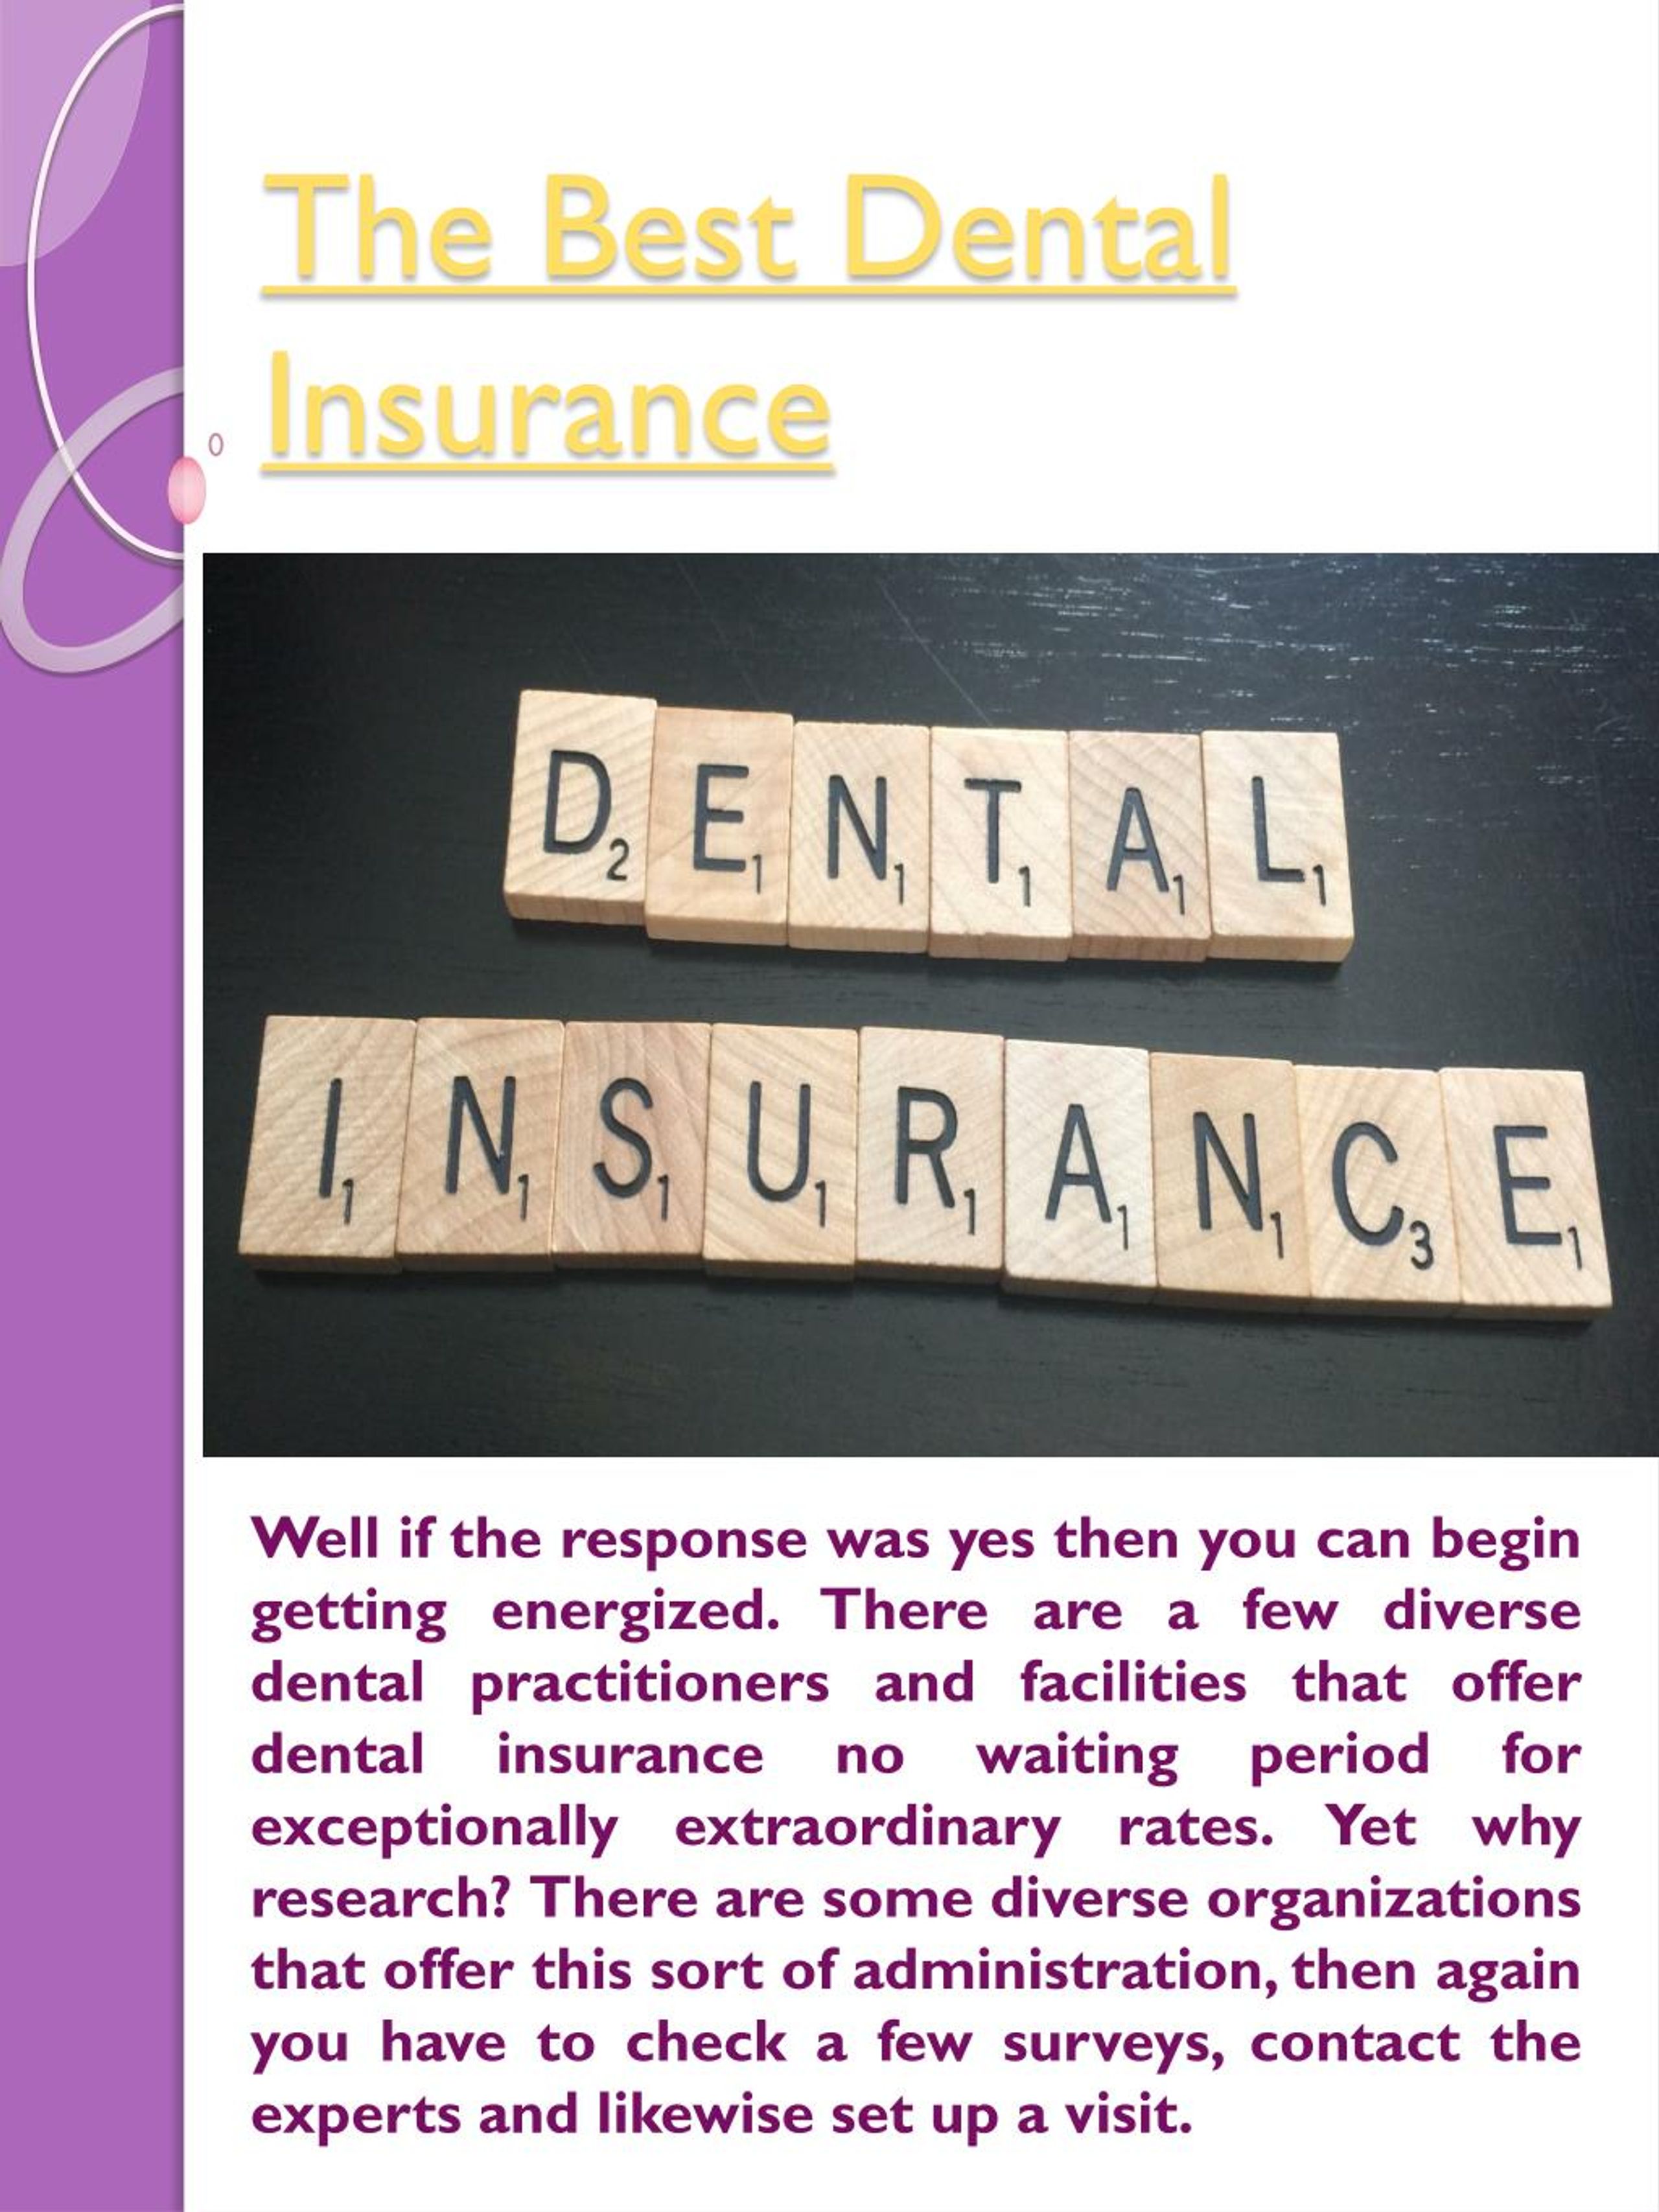 PPT no waiting period dental insurance PowerPoint